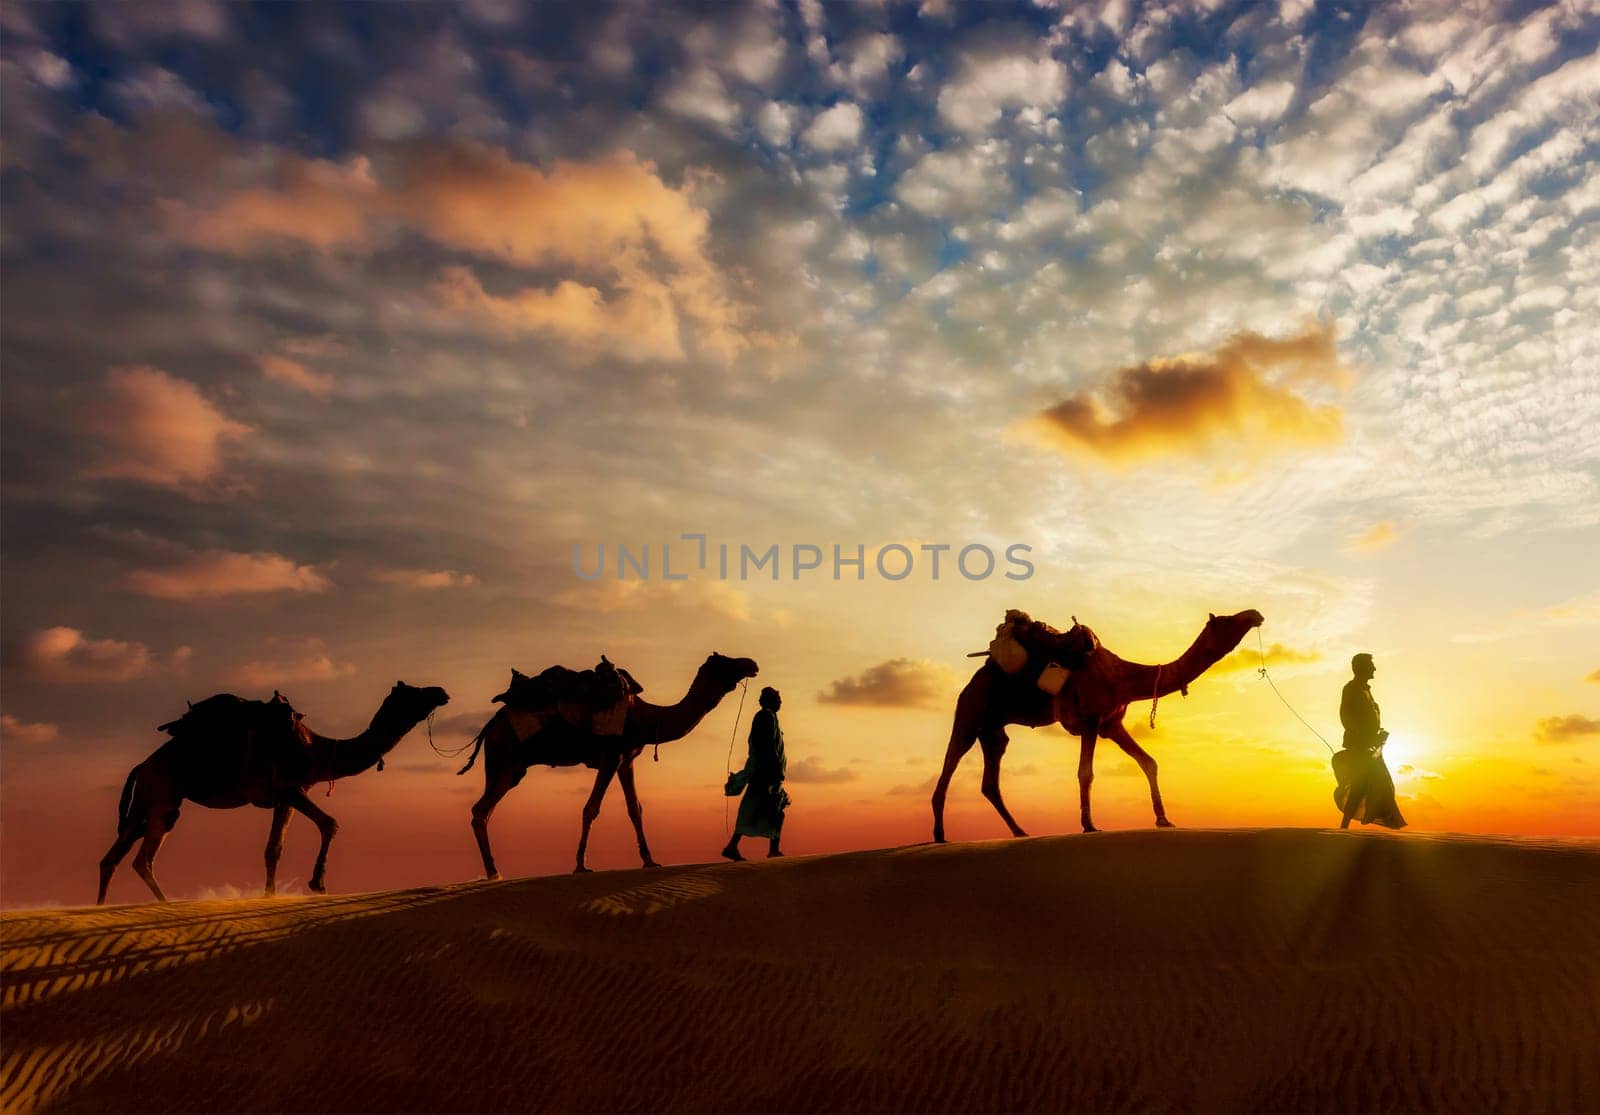 Travel background - two cameleers (camel drivers) with camels silhouettes in dunes of desert on sunset